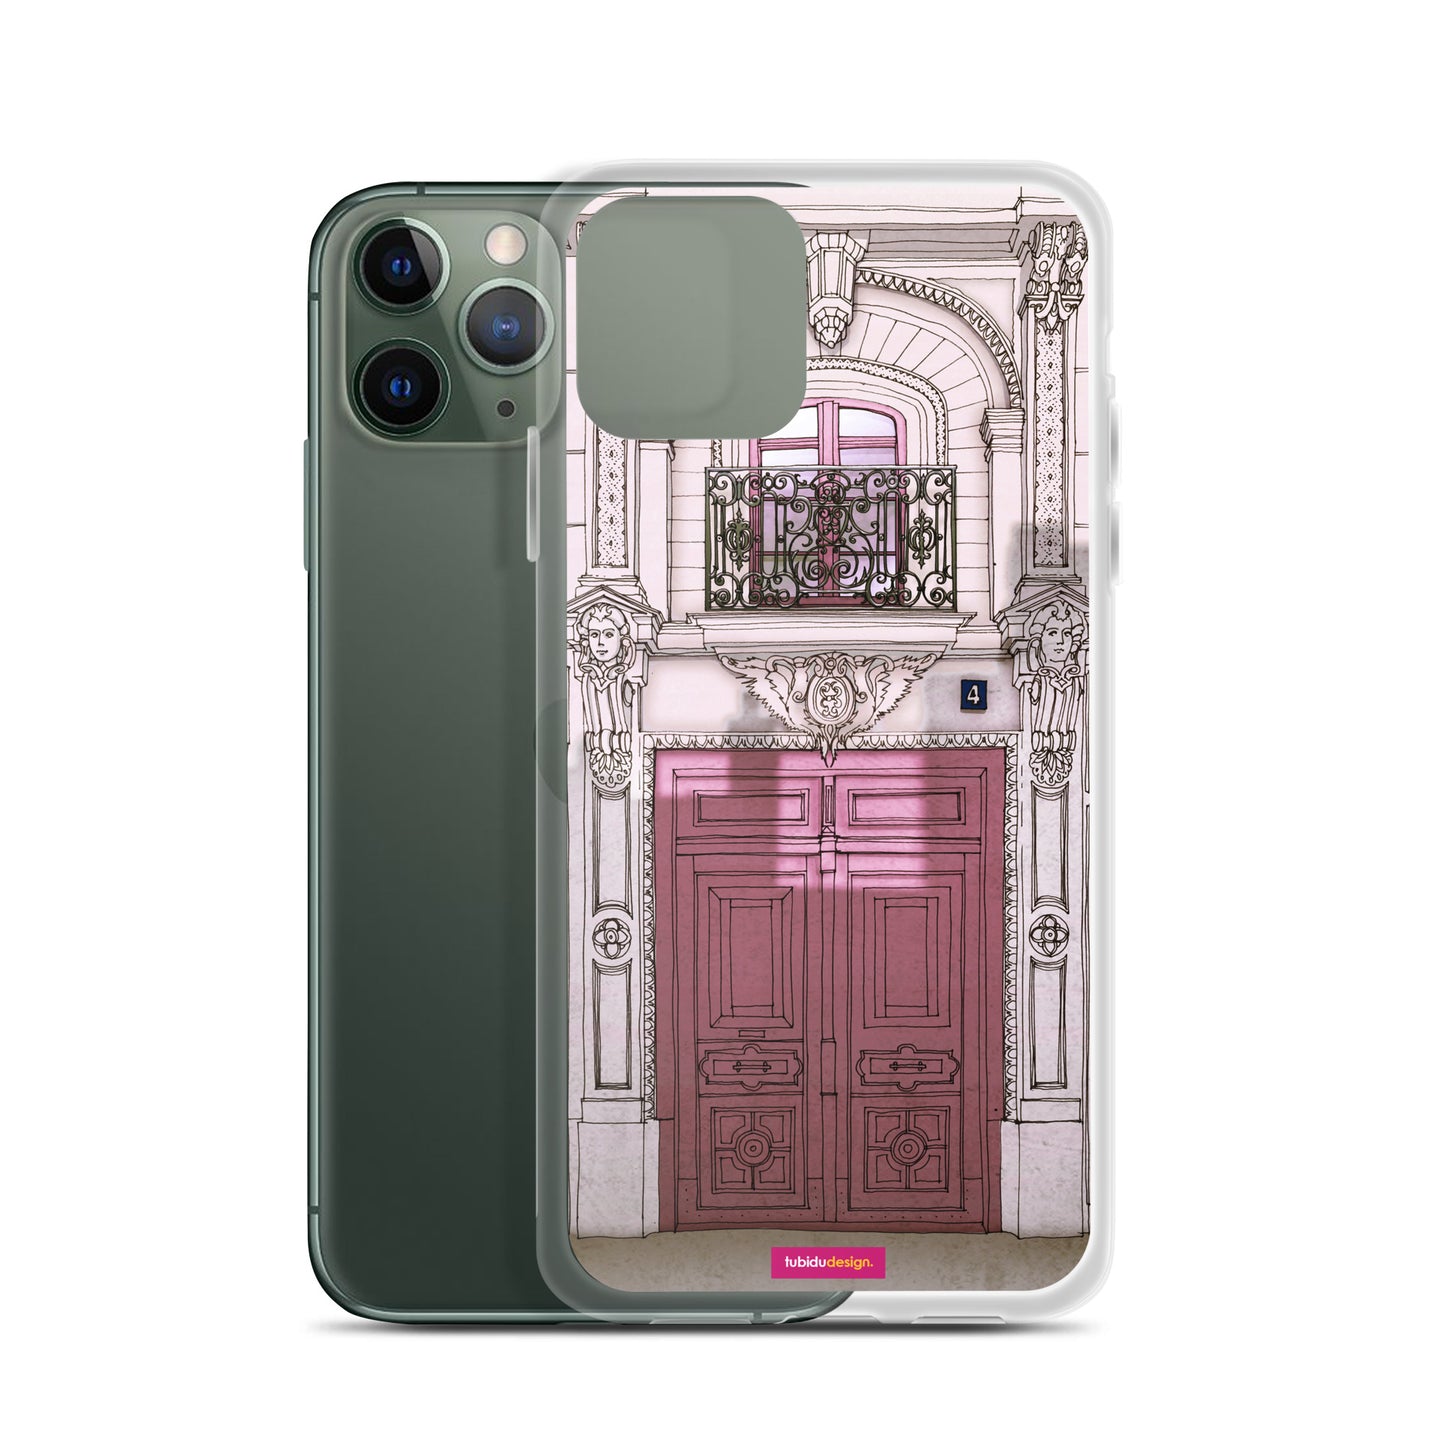 Fight for the light (rose) - Illustrated iPhone Case